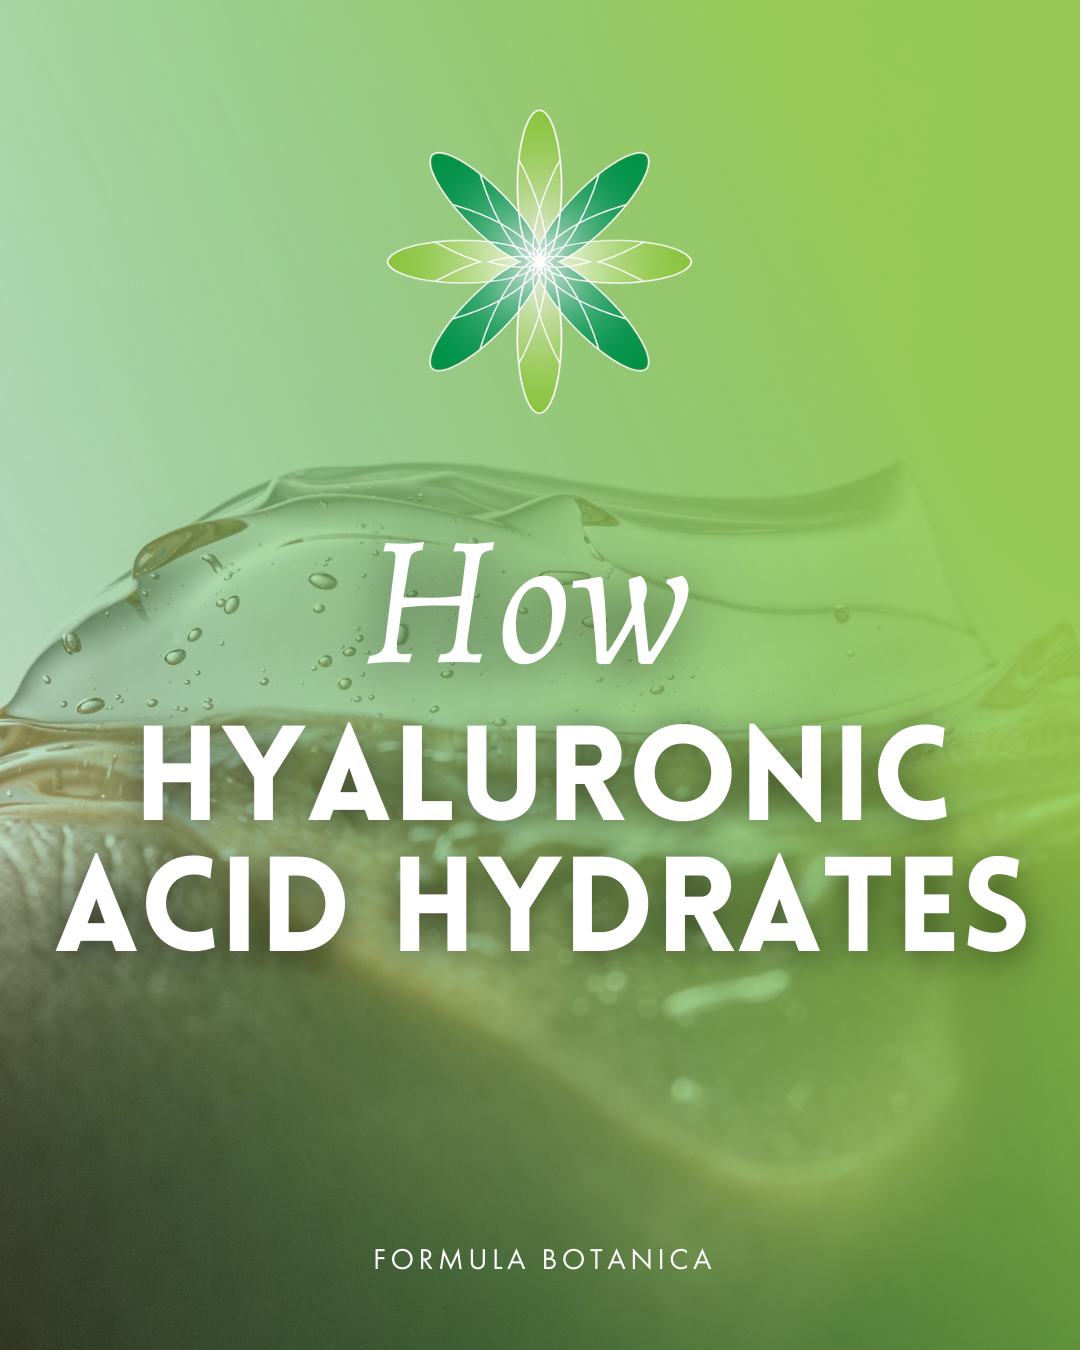 How hyaluronic acid hydrates